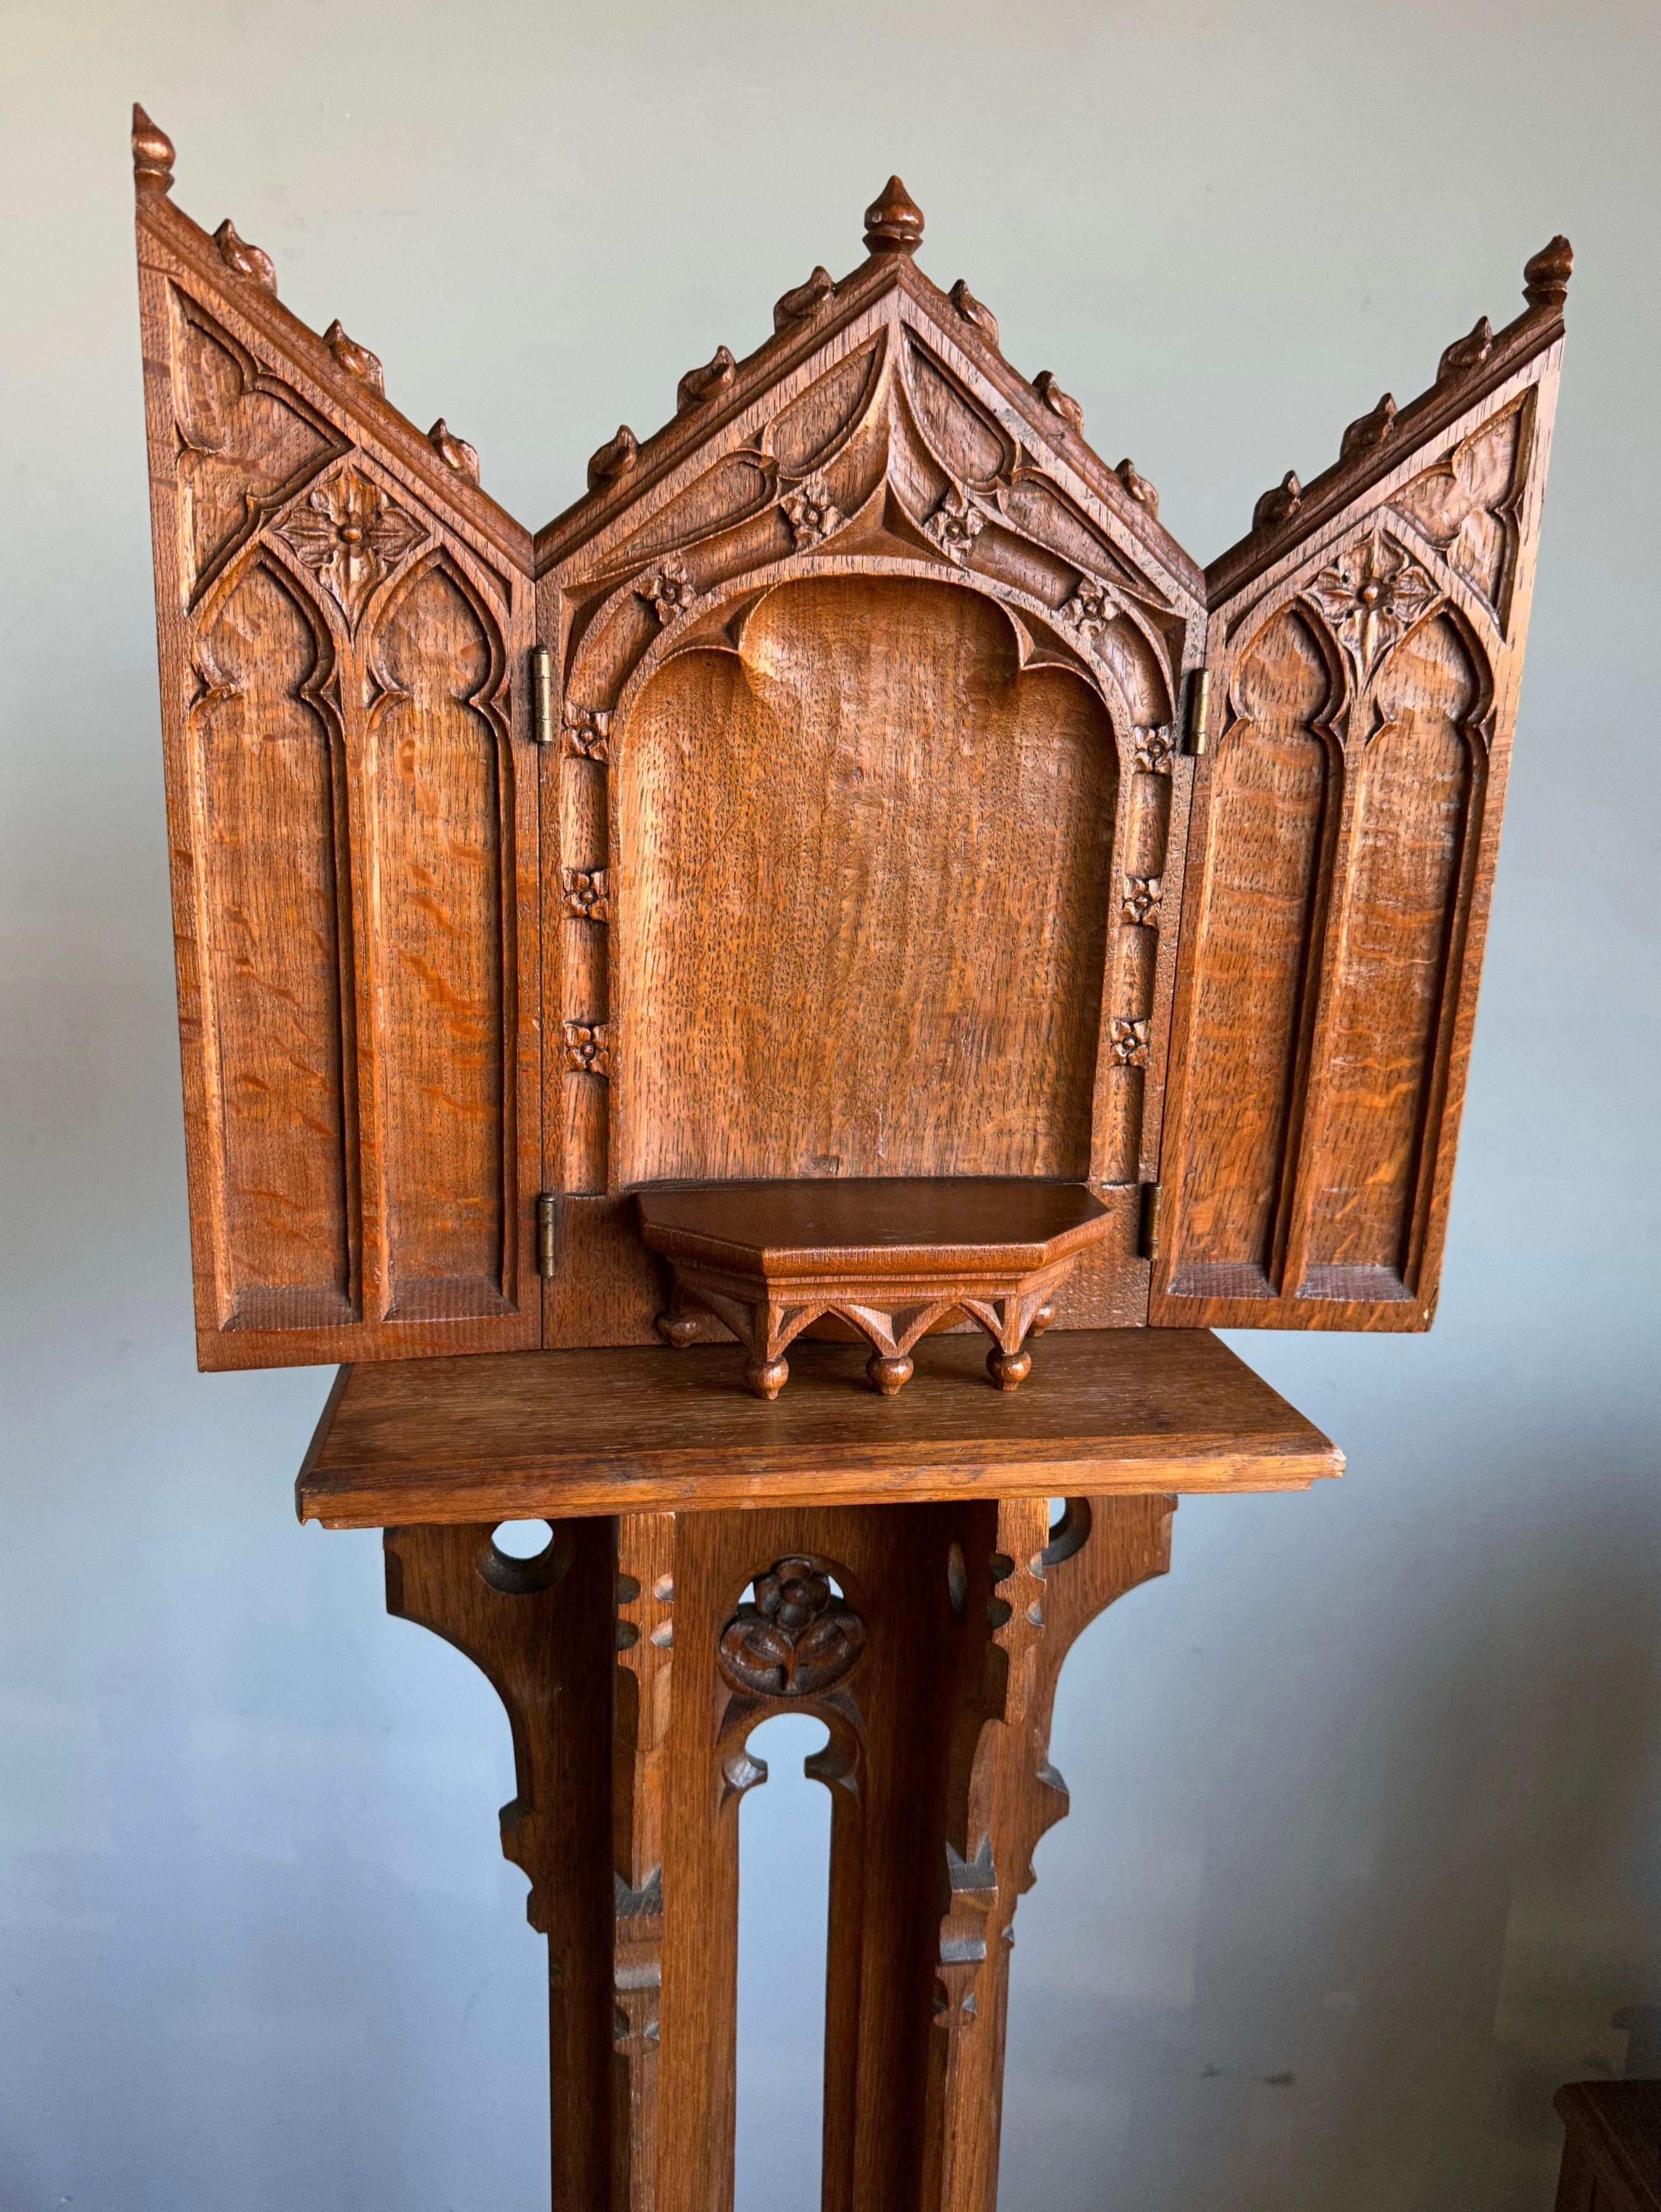 Rare and superb condition, Gothic-art shrine with Mother Mary and Child Jesus statuette.

This handsome and decorative, Gothic wall shrine is completely hand-crafted out of solid oak and it will look awesome, no matter where you decide to mount or